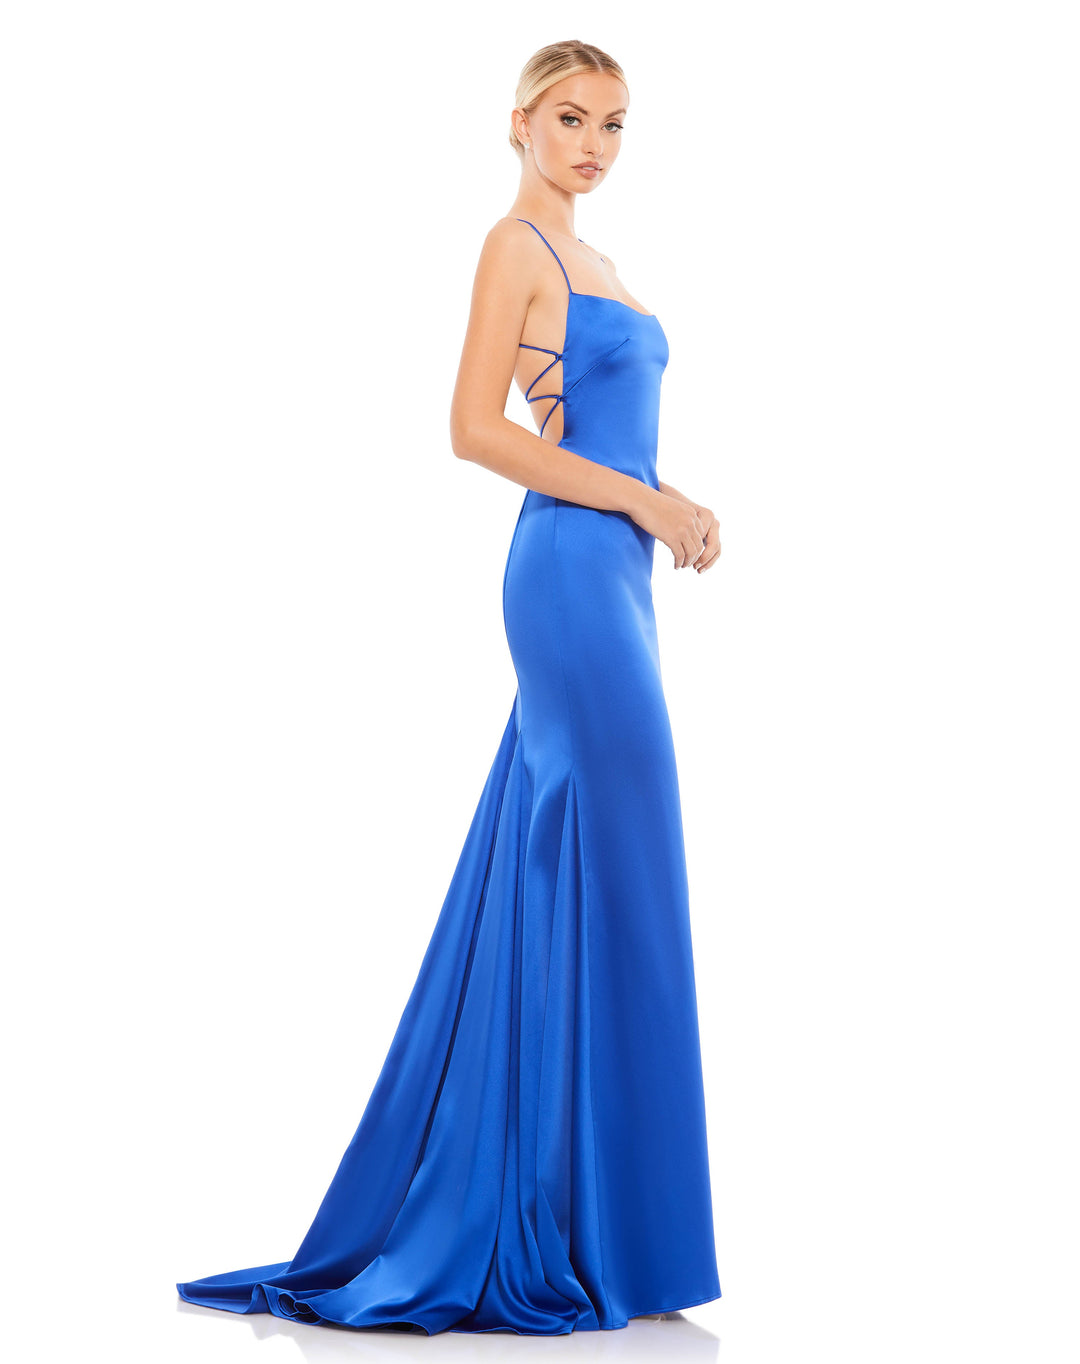 Lace Up Back Charmeuse Gown - FOSTANI